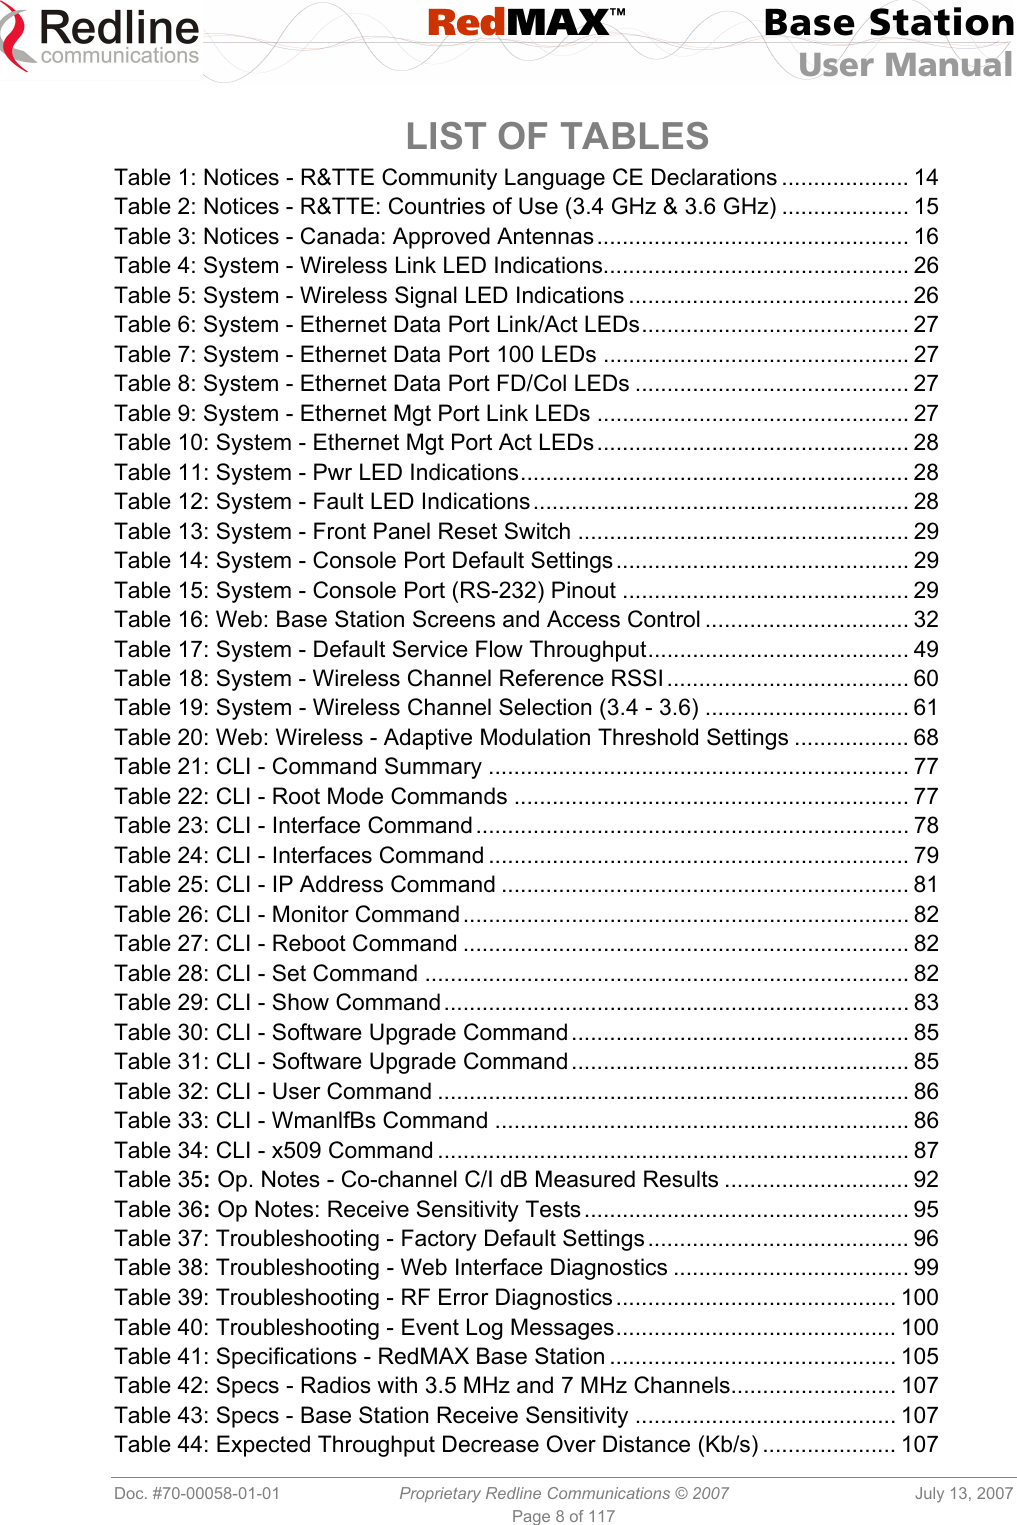  RedMAX™ Base Station User Manual   Doc. #70-00058-01-01  Proprietary Redline Communications © 2007  July 13, 2007 Page 8 of 117  LIST OF TABLES Table 1: Notices - R&amp;TTE Community Language CE Declarations .................... 14 Table 2: Notices - R&amp;TTE: Countries of Use (3.4 GHz &amp; 3.6 GHz) .................... 15 Table 3: Notices - Canada: Approved Antennas................................................. 16 Table 4: System - Wireless Link LED Indications................................................ 26 Table 5: System - Wireless Signal LED Indications ............................................ 26 Table 6: System - Ethernet Data Port Link/Act LEDs.......................................... 27 Table 7: System - Ethernet Data Port 100 LEDs ................................................ 27 Table 8: System - Ethernet Data Port FD/Col LEDs ........................................... 27 Table 9: System - Ethernet Mgt Port Link LEDs ................................................. 27 Table 10: System - Ethernet Mgt Port Act LEDs................................................. 28 Table 11: System - Pwr LED Indications............................................................. 28 Table 12: System - Fault LED Indications........................................................... 28 Table 13: System - Front Panel Reset Switch .................................................... 29 Table 14: System - Console Port Default Settings.............................................. 29 Table 15: System - Console Port (RS-232) Pinout ............................................. 29 Table 16: Web: Base Station Screens and Access Control ................................ 32 Table 17: System - Default Service Flow Throughput......................................... 49 Table 18: System - Wireless Channel Reference RSSI...................................... 60 Table 19: System - Wireless Channel Selection (3.4 - 3.6) ................................ 61 Table 20: Web: Wireless - Adaptive Modulation Threshold Settings .................. 68 Table 21: CLI - Command Summary .................................................................. 77 Table 22: CLI - Root Mode Commands .............................................................. 77 Table 23: CLI - Interface Command.................................................................... 78 Table 24: CLI - Interfaces Command .................................................................. 79 Table 25: CLI - IP Address Command ................................................................ 81 Table 26: CLI - Monitor Command...................................................................... 82 Table 27: CLI - Reboot Command ...................................................................... 82 Table 28: CLI - Set Command ............................................................................ 82 Table 29: CLI - Show Command......................................................................... 83 Table 30: CLI - Software Upgrade Command..................................................... 85 Table 31: CLI - Software Upgrade Command..................................................... 85 Table 32: CLI - User Command .......................................................................... 86 Table 33: CLI - WmanlfBs Command ................................................................. 86 Table 34: CLI - x509 Command .......................................................................... 87 Table 35: Op. Notes - Co-channel C/I dB Measured Results ............................. 92 Table 36: Op Notes: Receive Sensitivity Tests................................................... 95 Table 37: Troubleshooting - Factory Default Settings......................................... 96 Table 38: Troubleshooting - Web Interface Diagnostics ..................................... 99 Table 39: Troubleshooting - RF Error Diagnostics............................................ 100 Table 40: Troubleshooting - Event Log Messages............................................ 100 Table 41: Specifications - RedMAX Base Station ............................................. 105 Table 42: Specs - Radios with 3.5 MHz and 7 MHz Channels.......................... 107 Table 43: Specs - Base Station Receive Sensitivity ......................................... 107 Table 44: Expected Throughput Decrease Over Distance (Kb/s) ..................... 107 